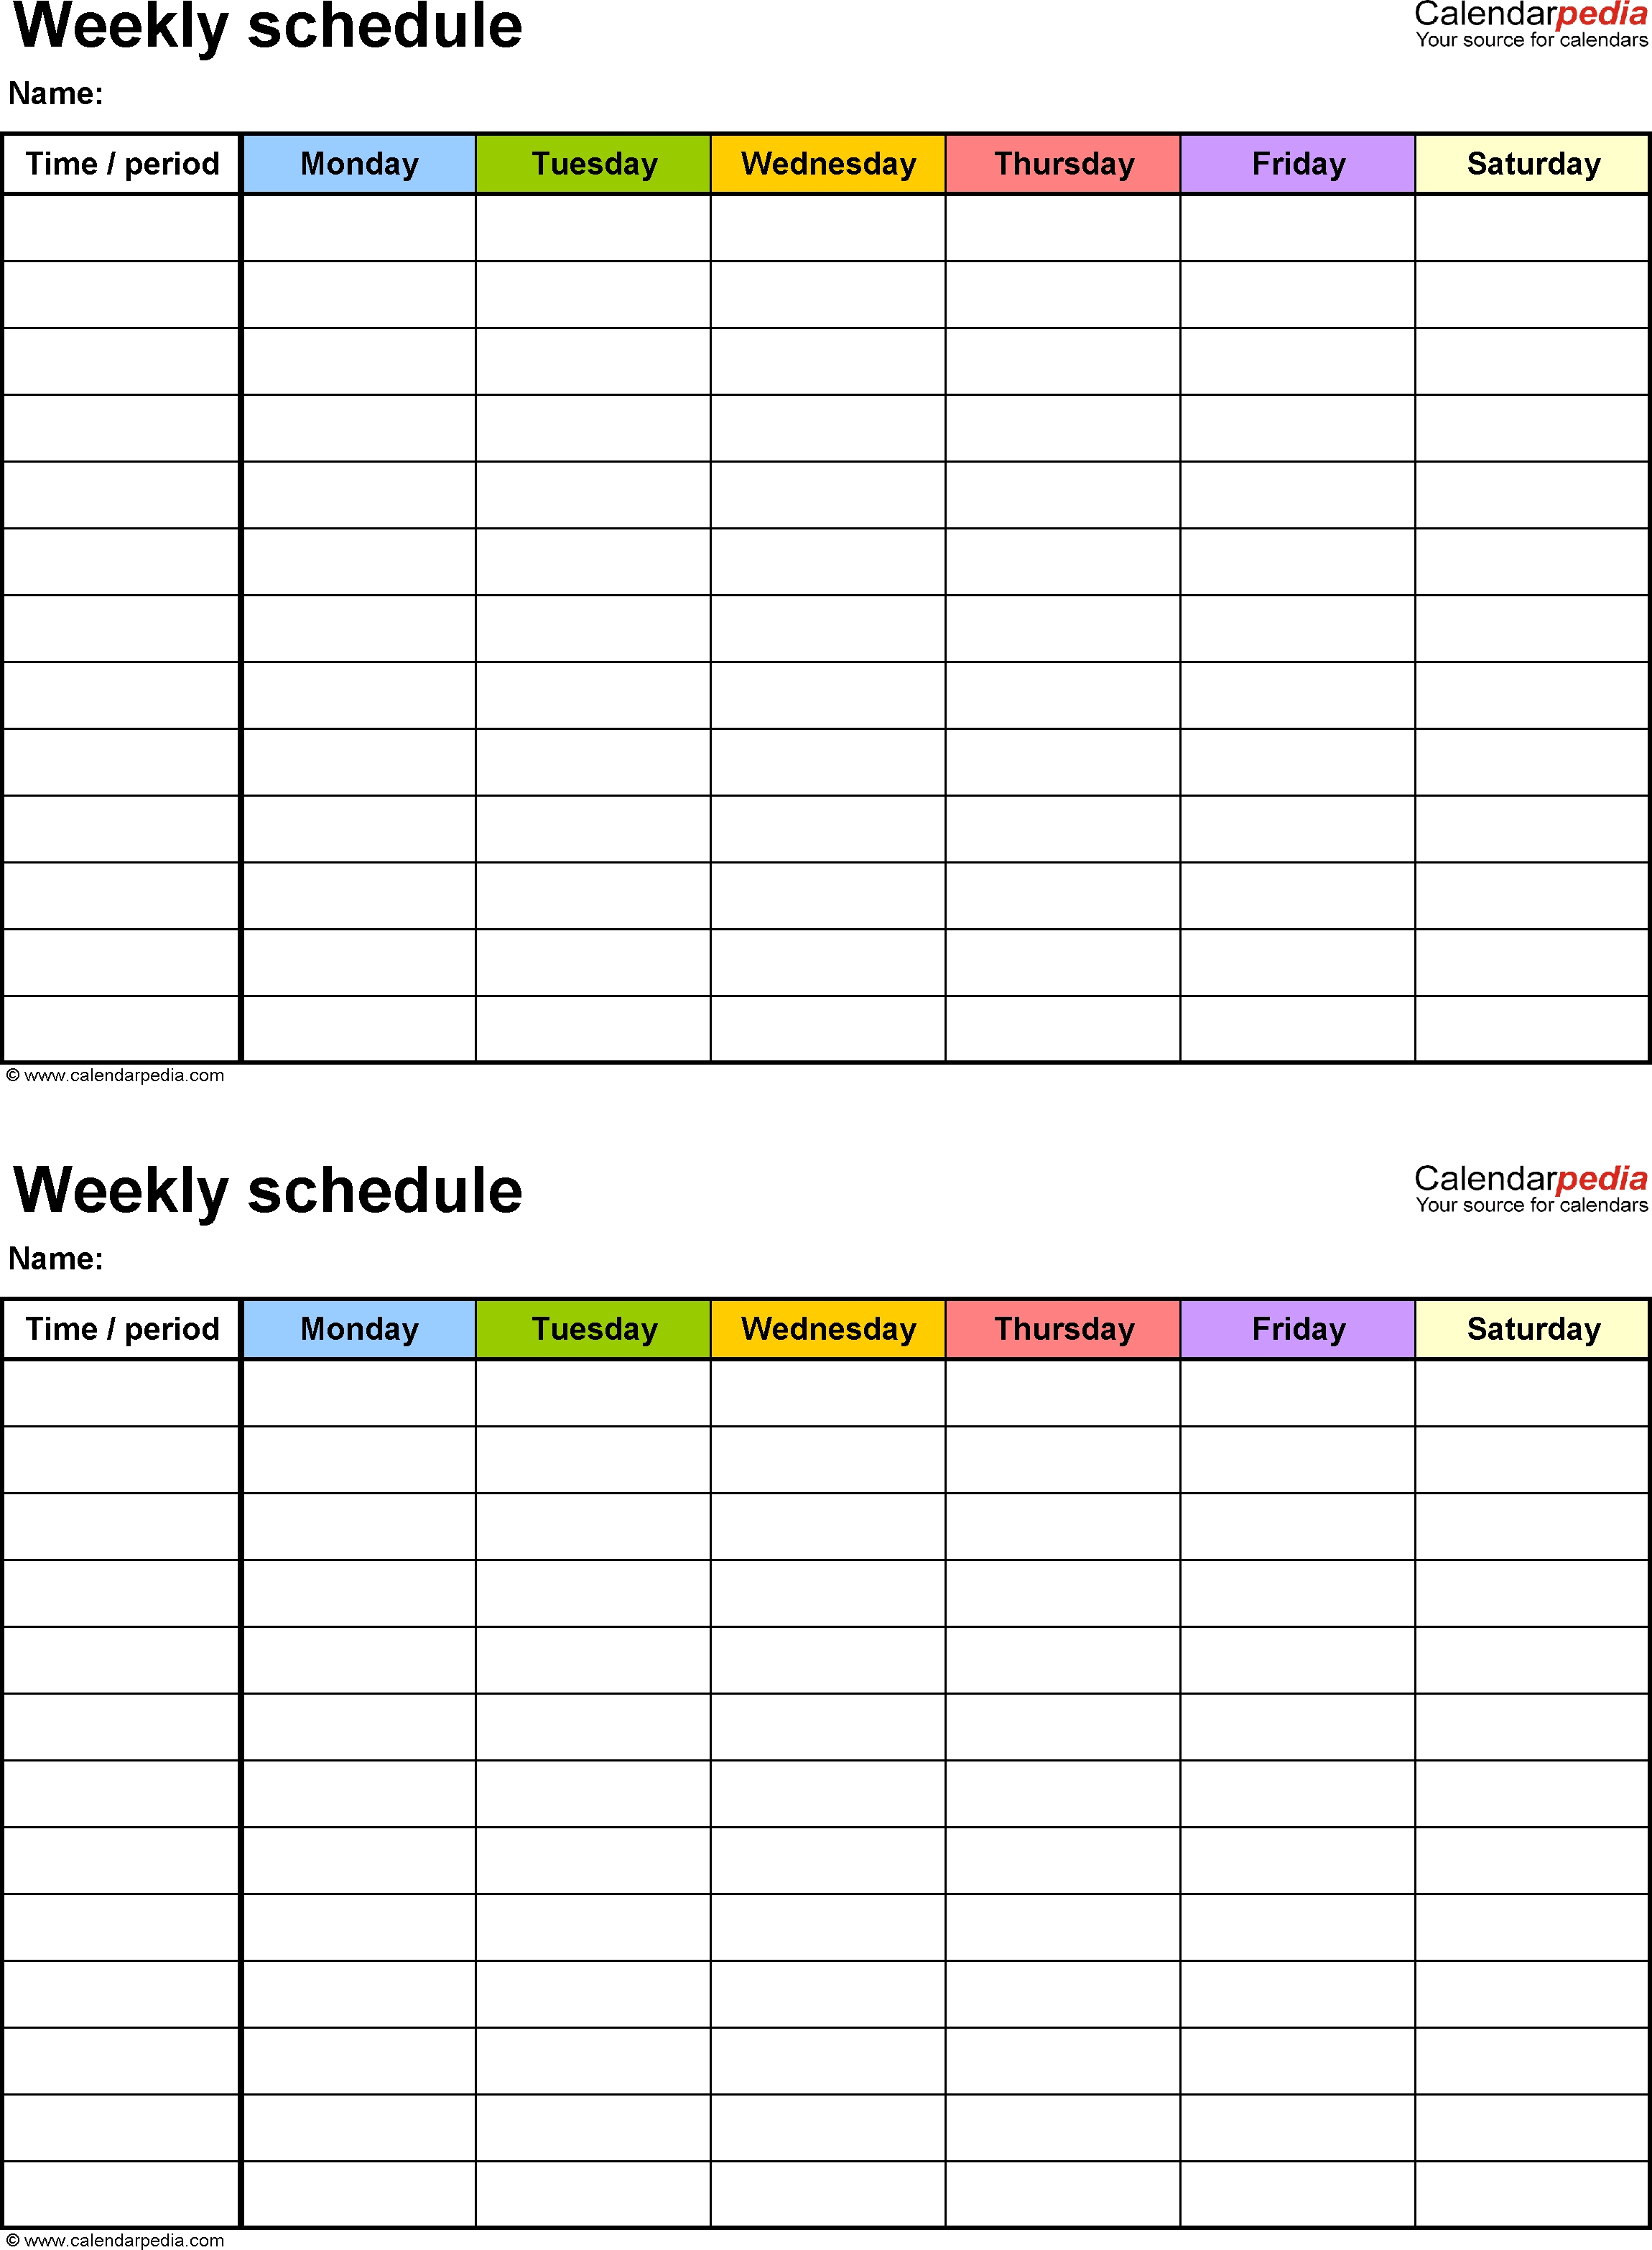 Free Weekly Schedule Templates For Word - 18 Templates 2 Week Blank Calendar Template